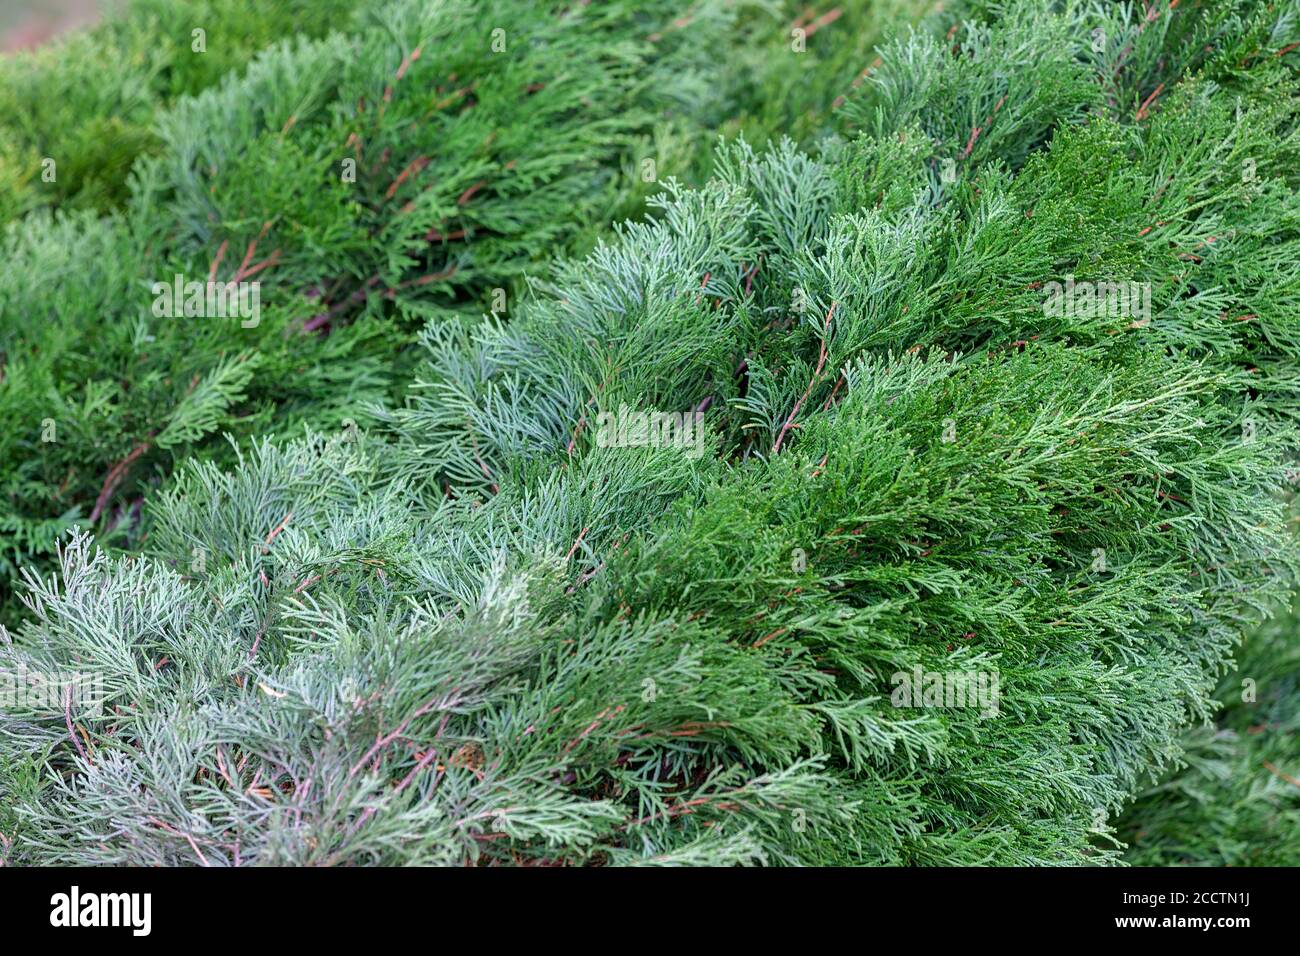 Young evergreen plants, note shallow depth of field Stock Photo